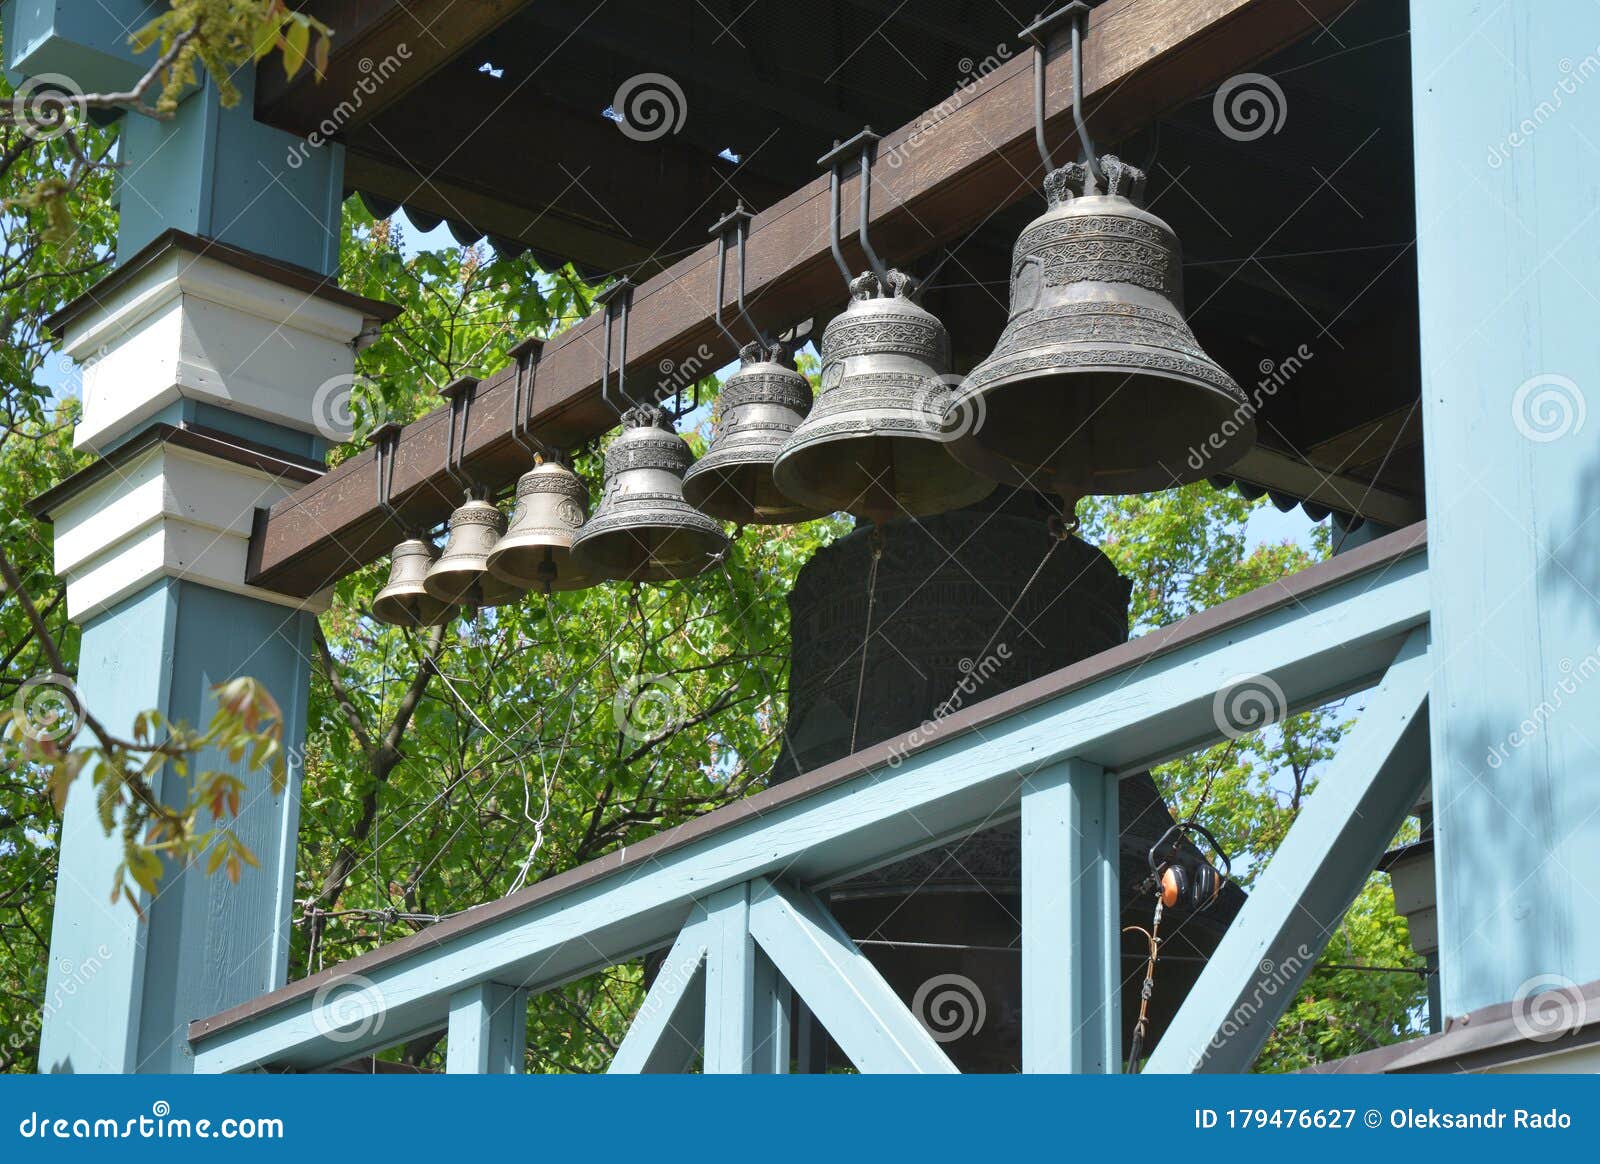 a collection of bronze, cup-d church bells housed in the bell tower of a church which are rung within the liturgy, feasts